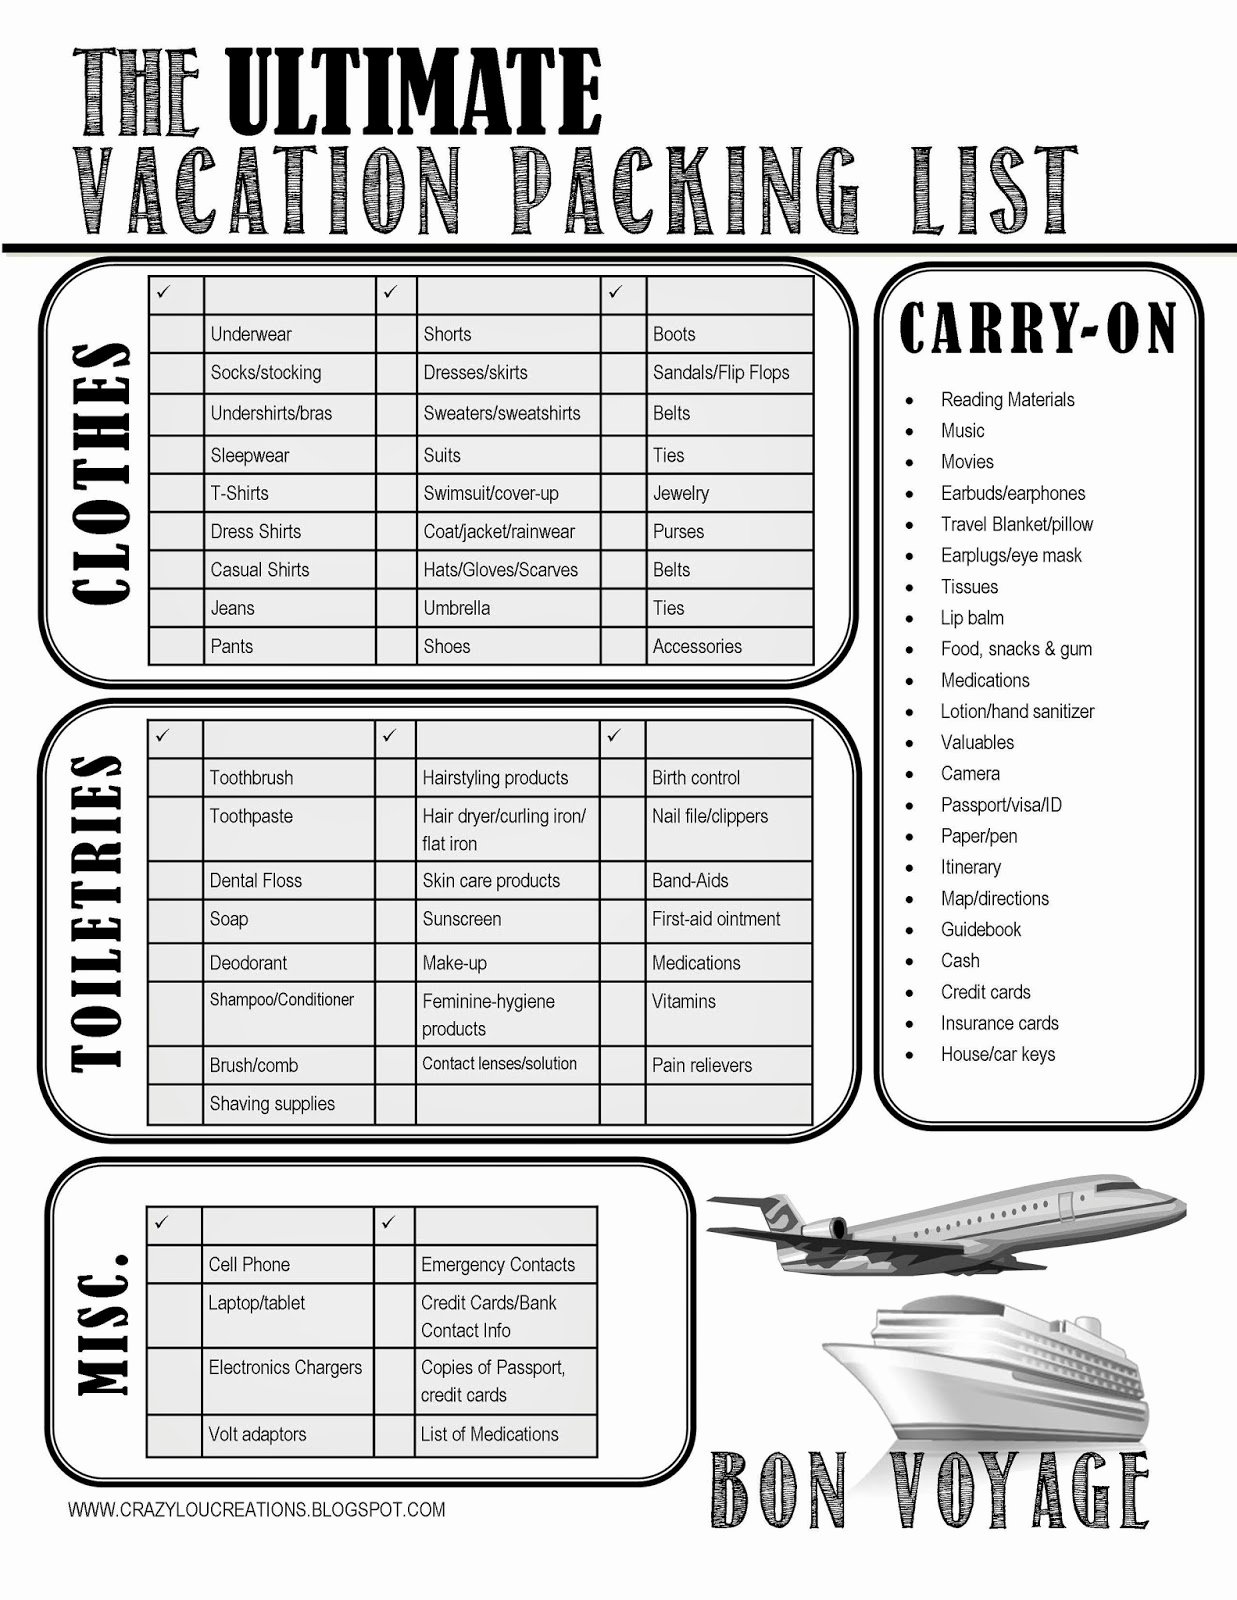 Travel Packing List Elegant Crazylou the Ultimate Vacation Packing List